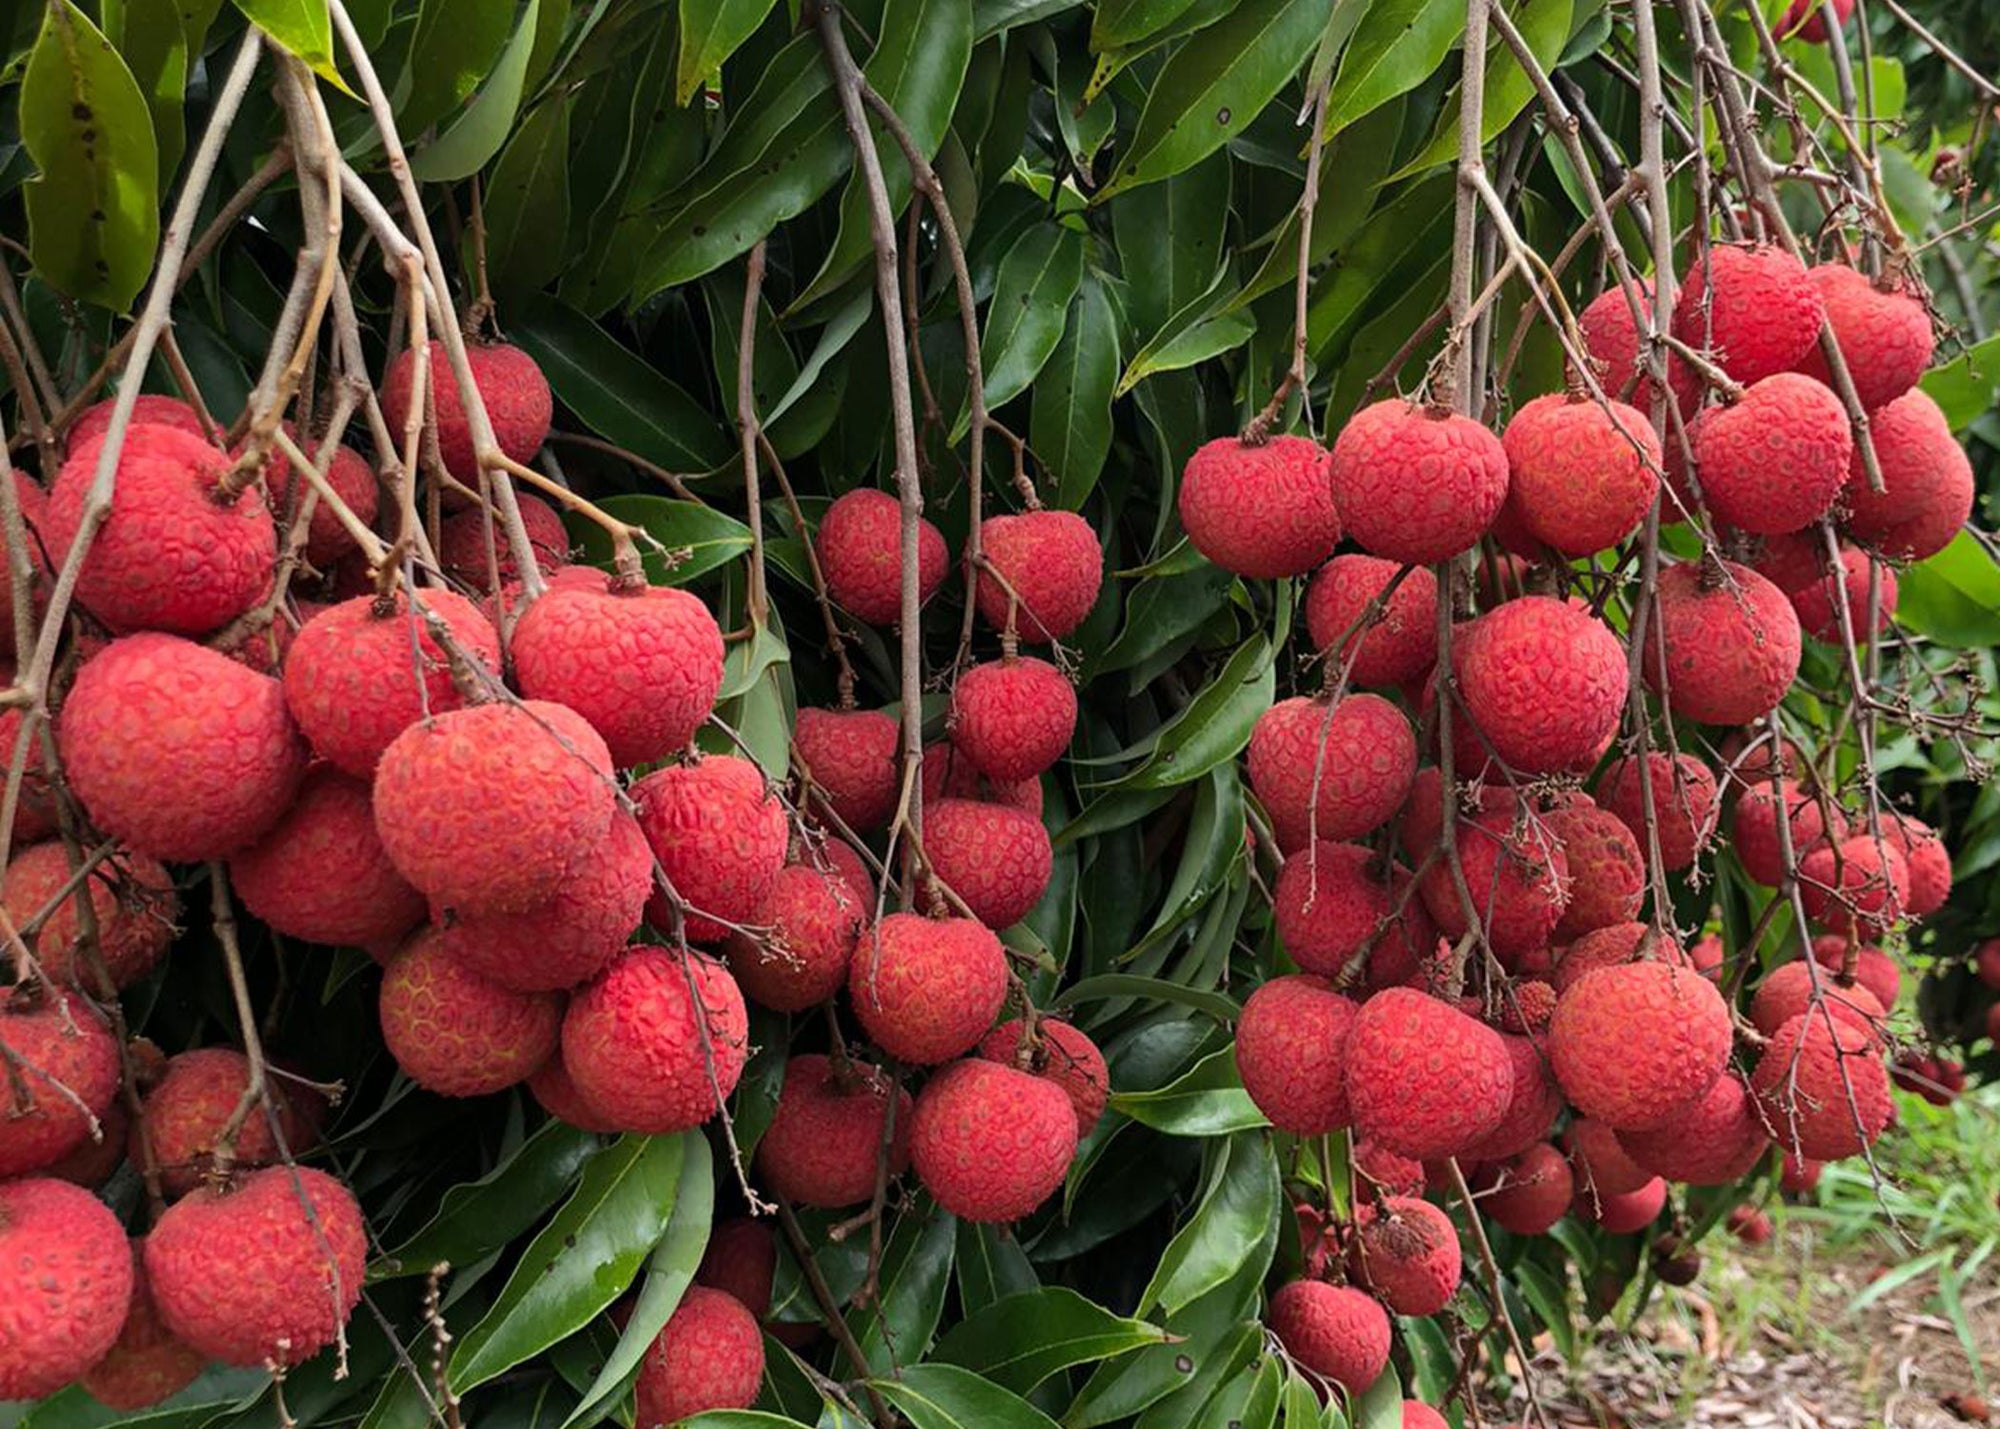 Branches with fresh kaimana lychee fruit at Hula Brother's orchard in Hawaii.